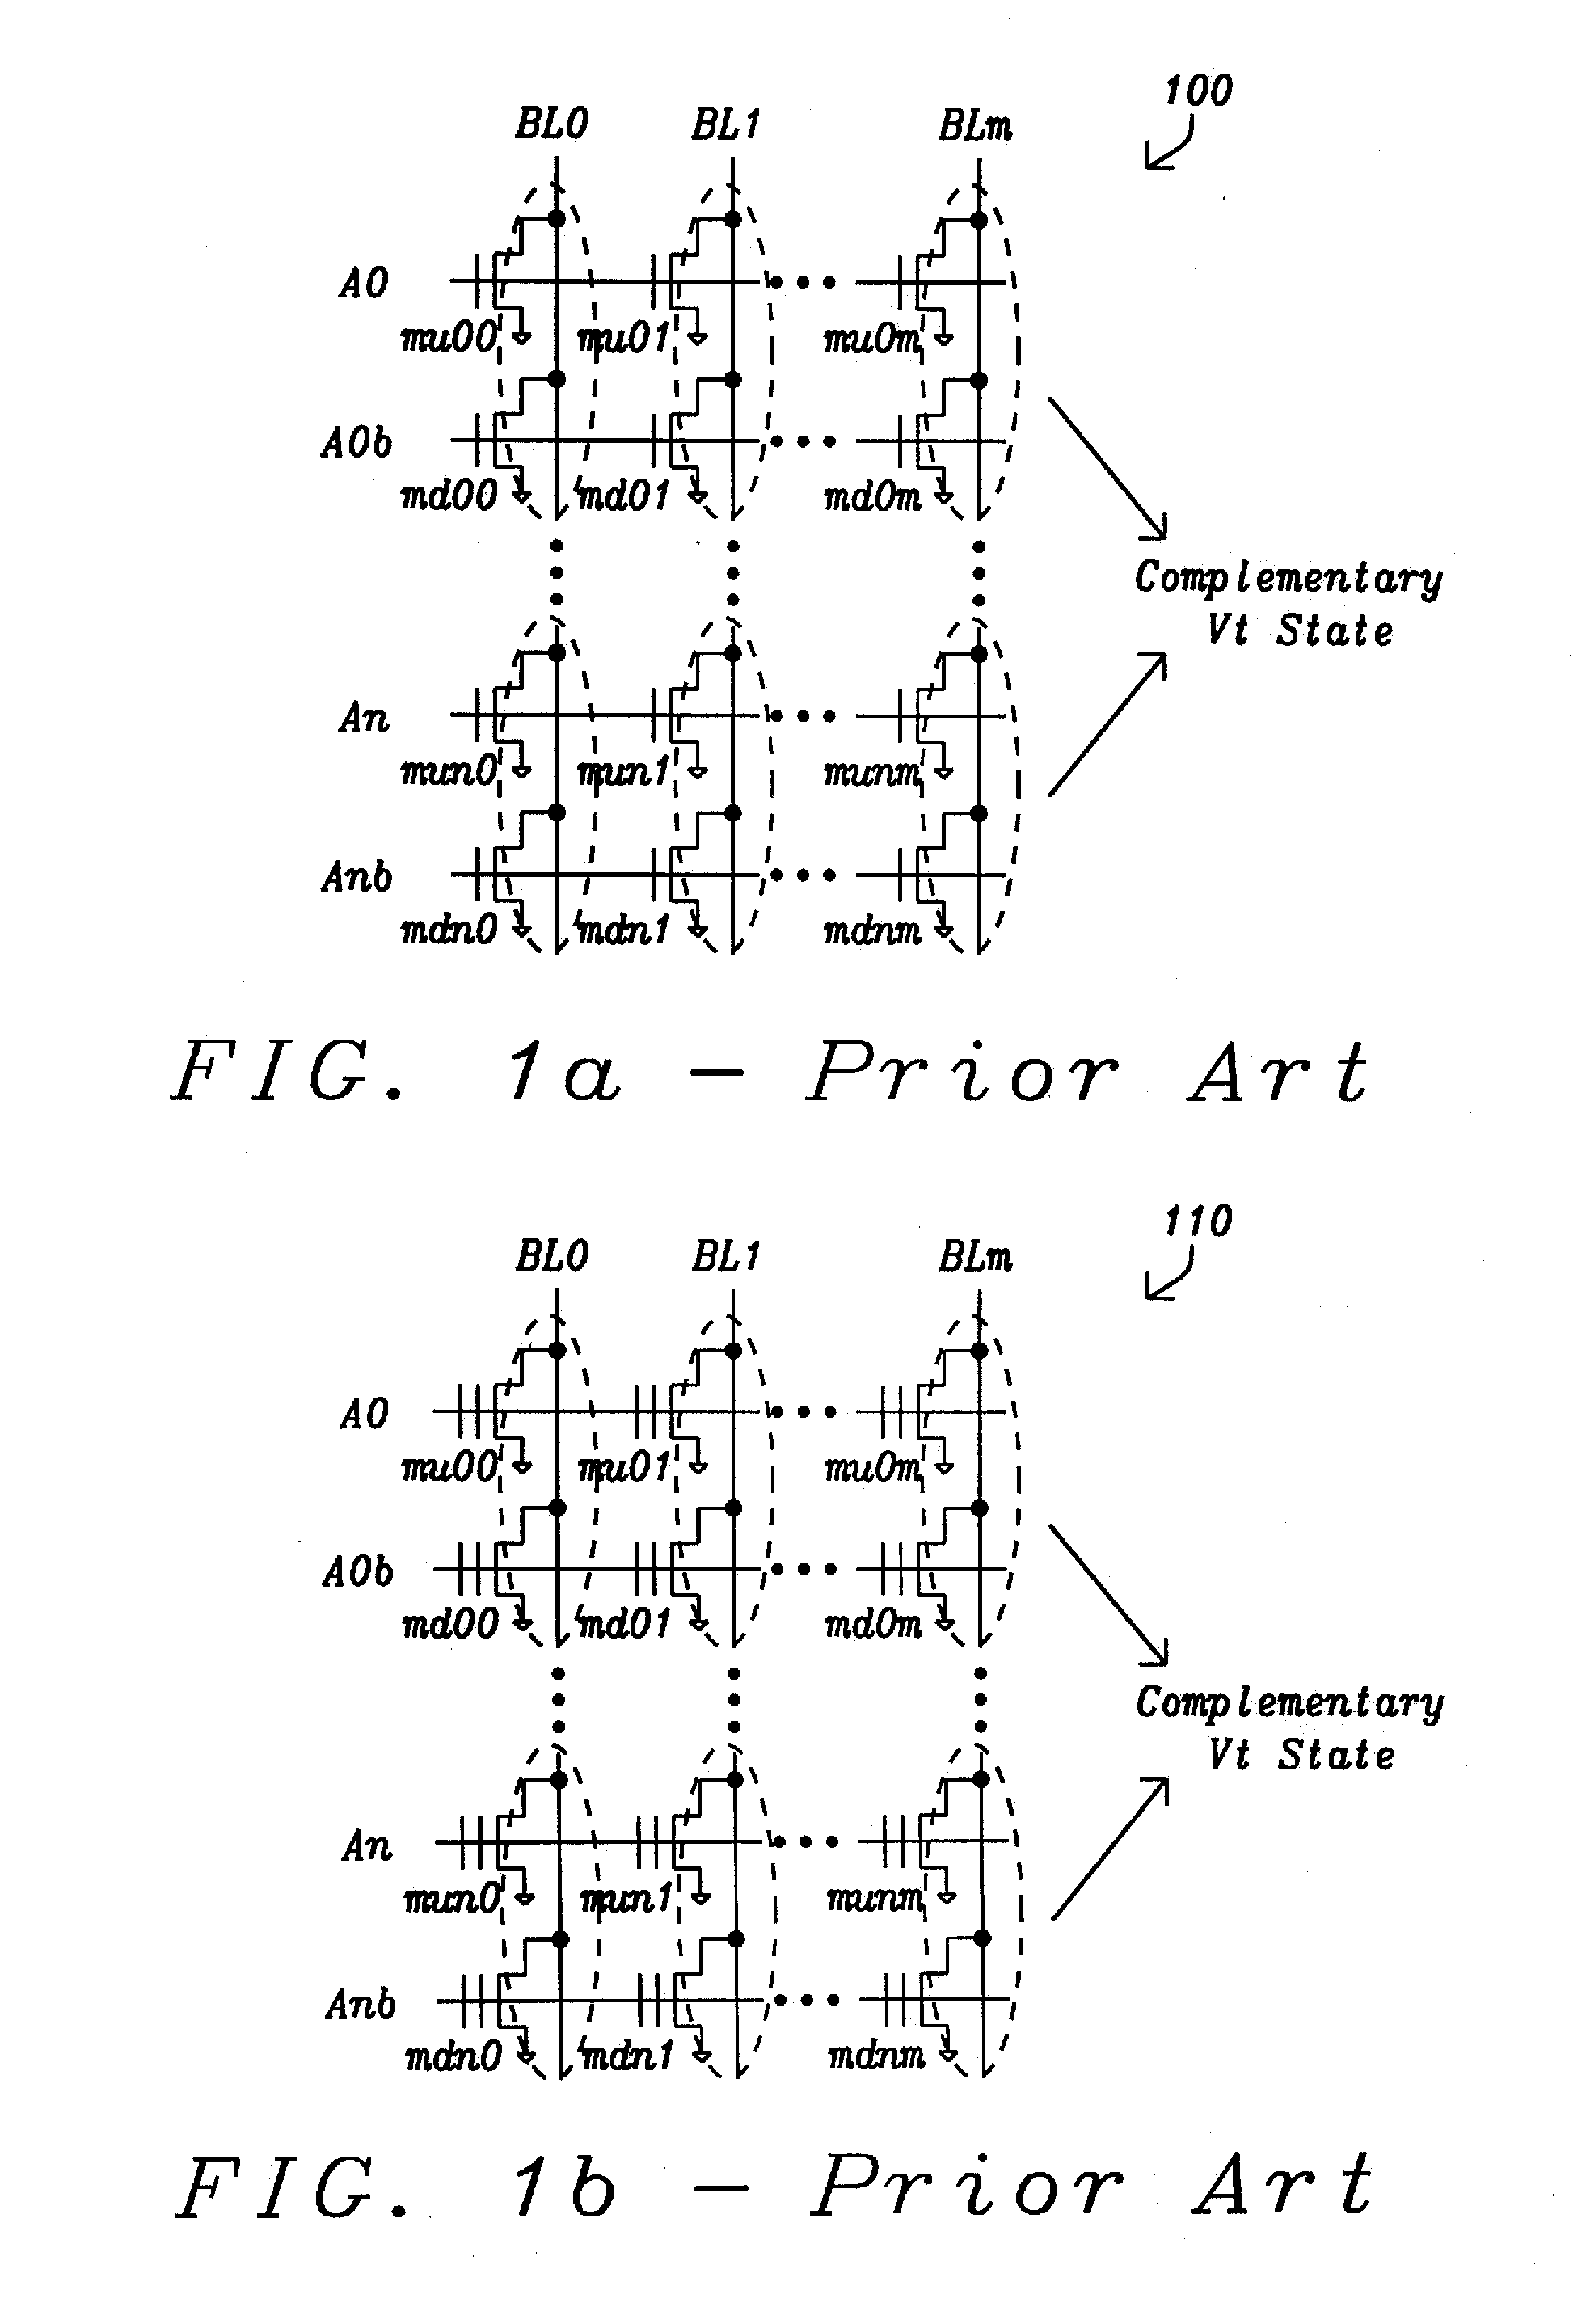 Flexible 2T-Based Fuzzy and Certain Matching Arrays